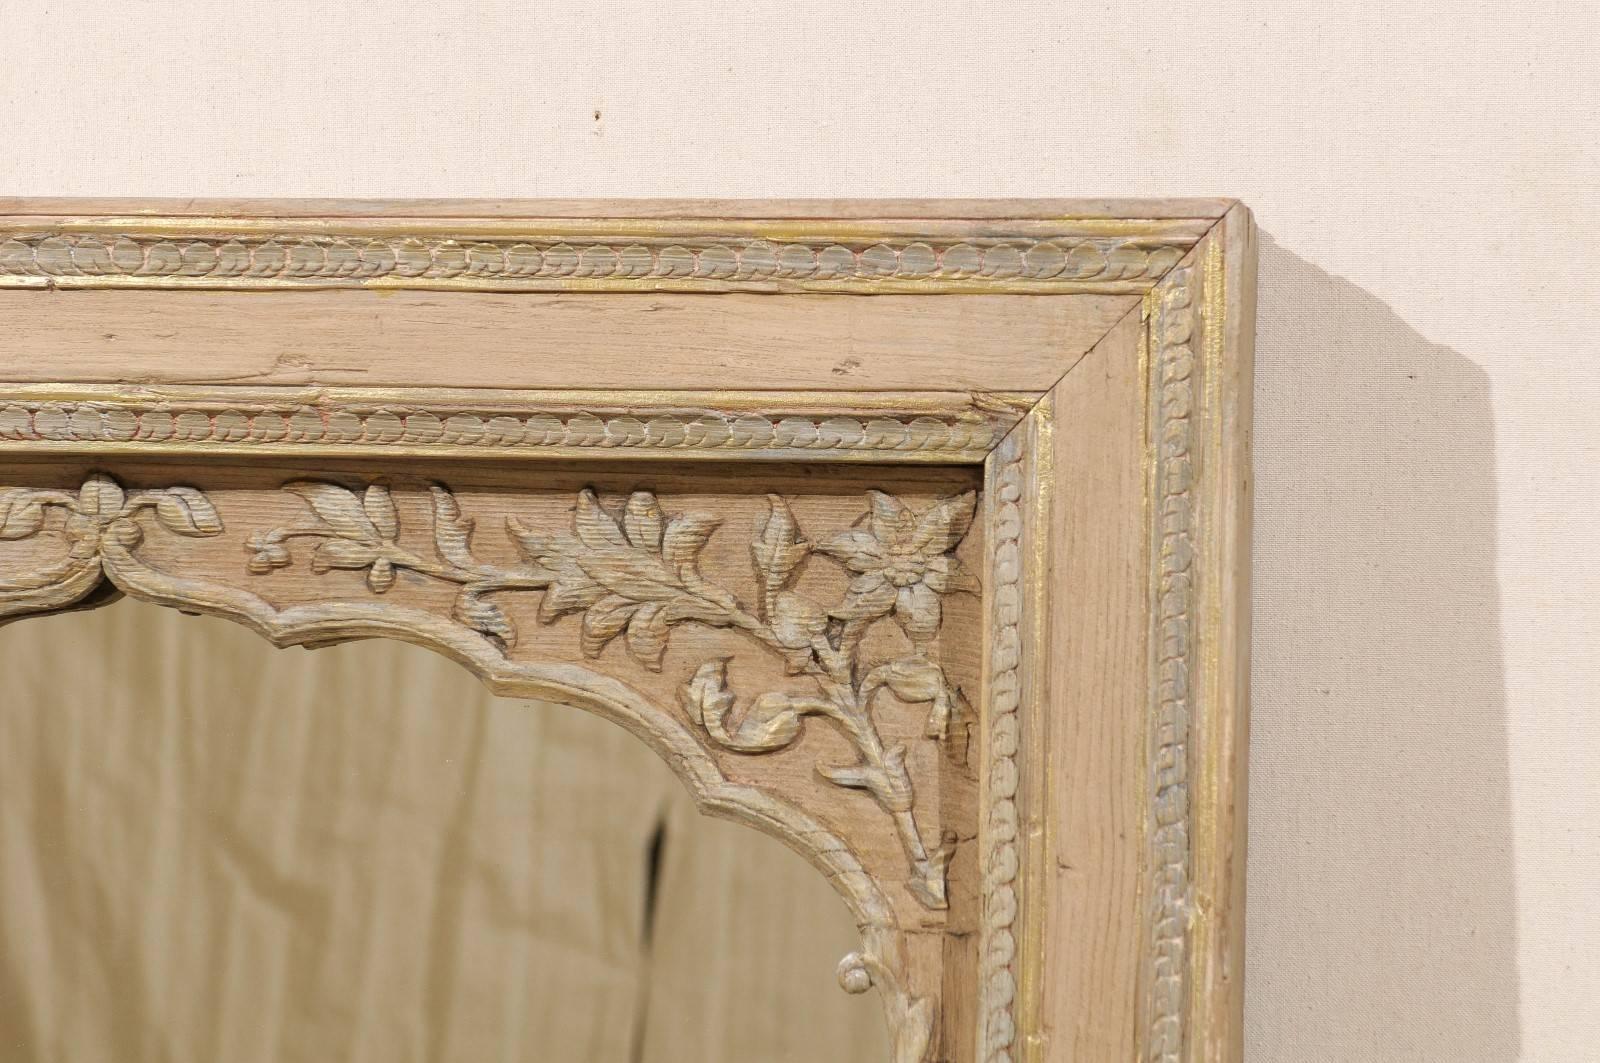 20th Century Intricately Carved British Colonial Style Wood Mirror, Soft Natural Tones